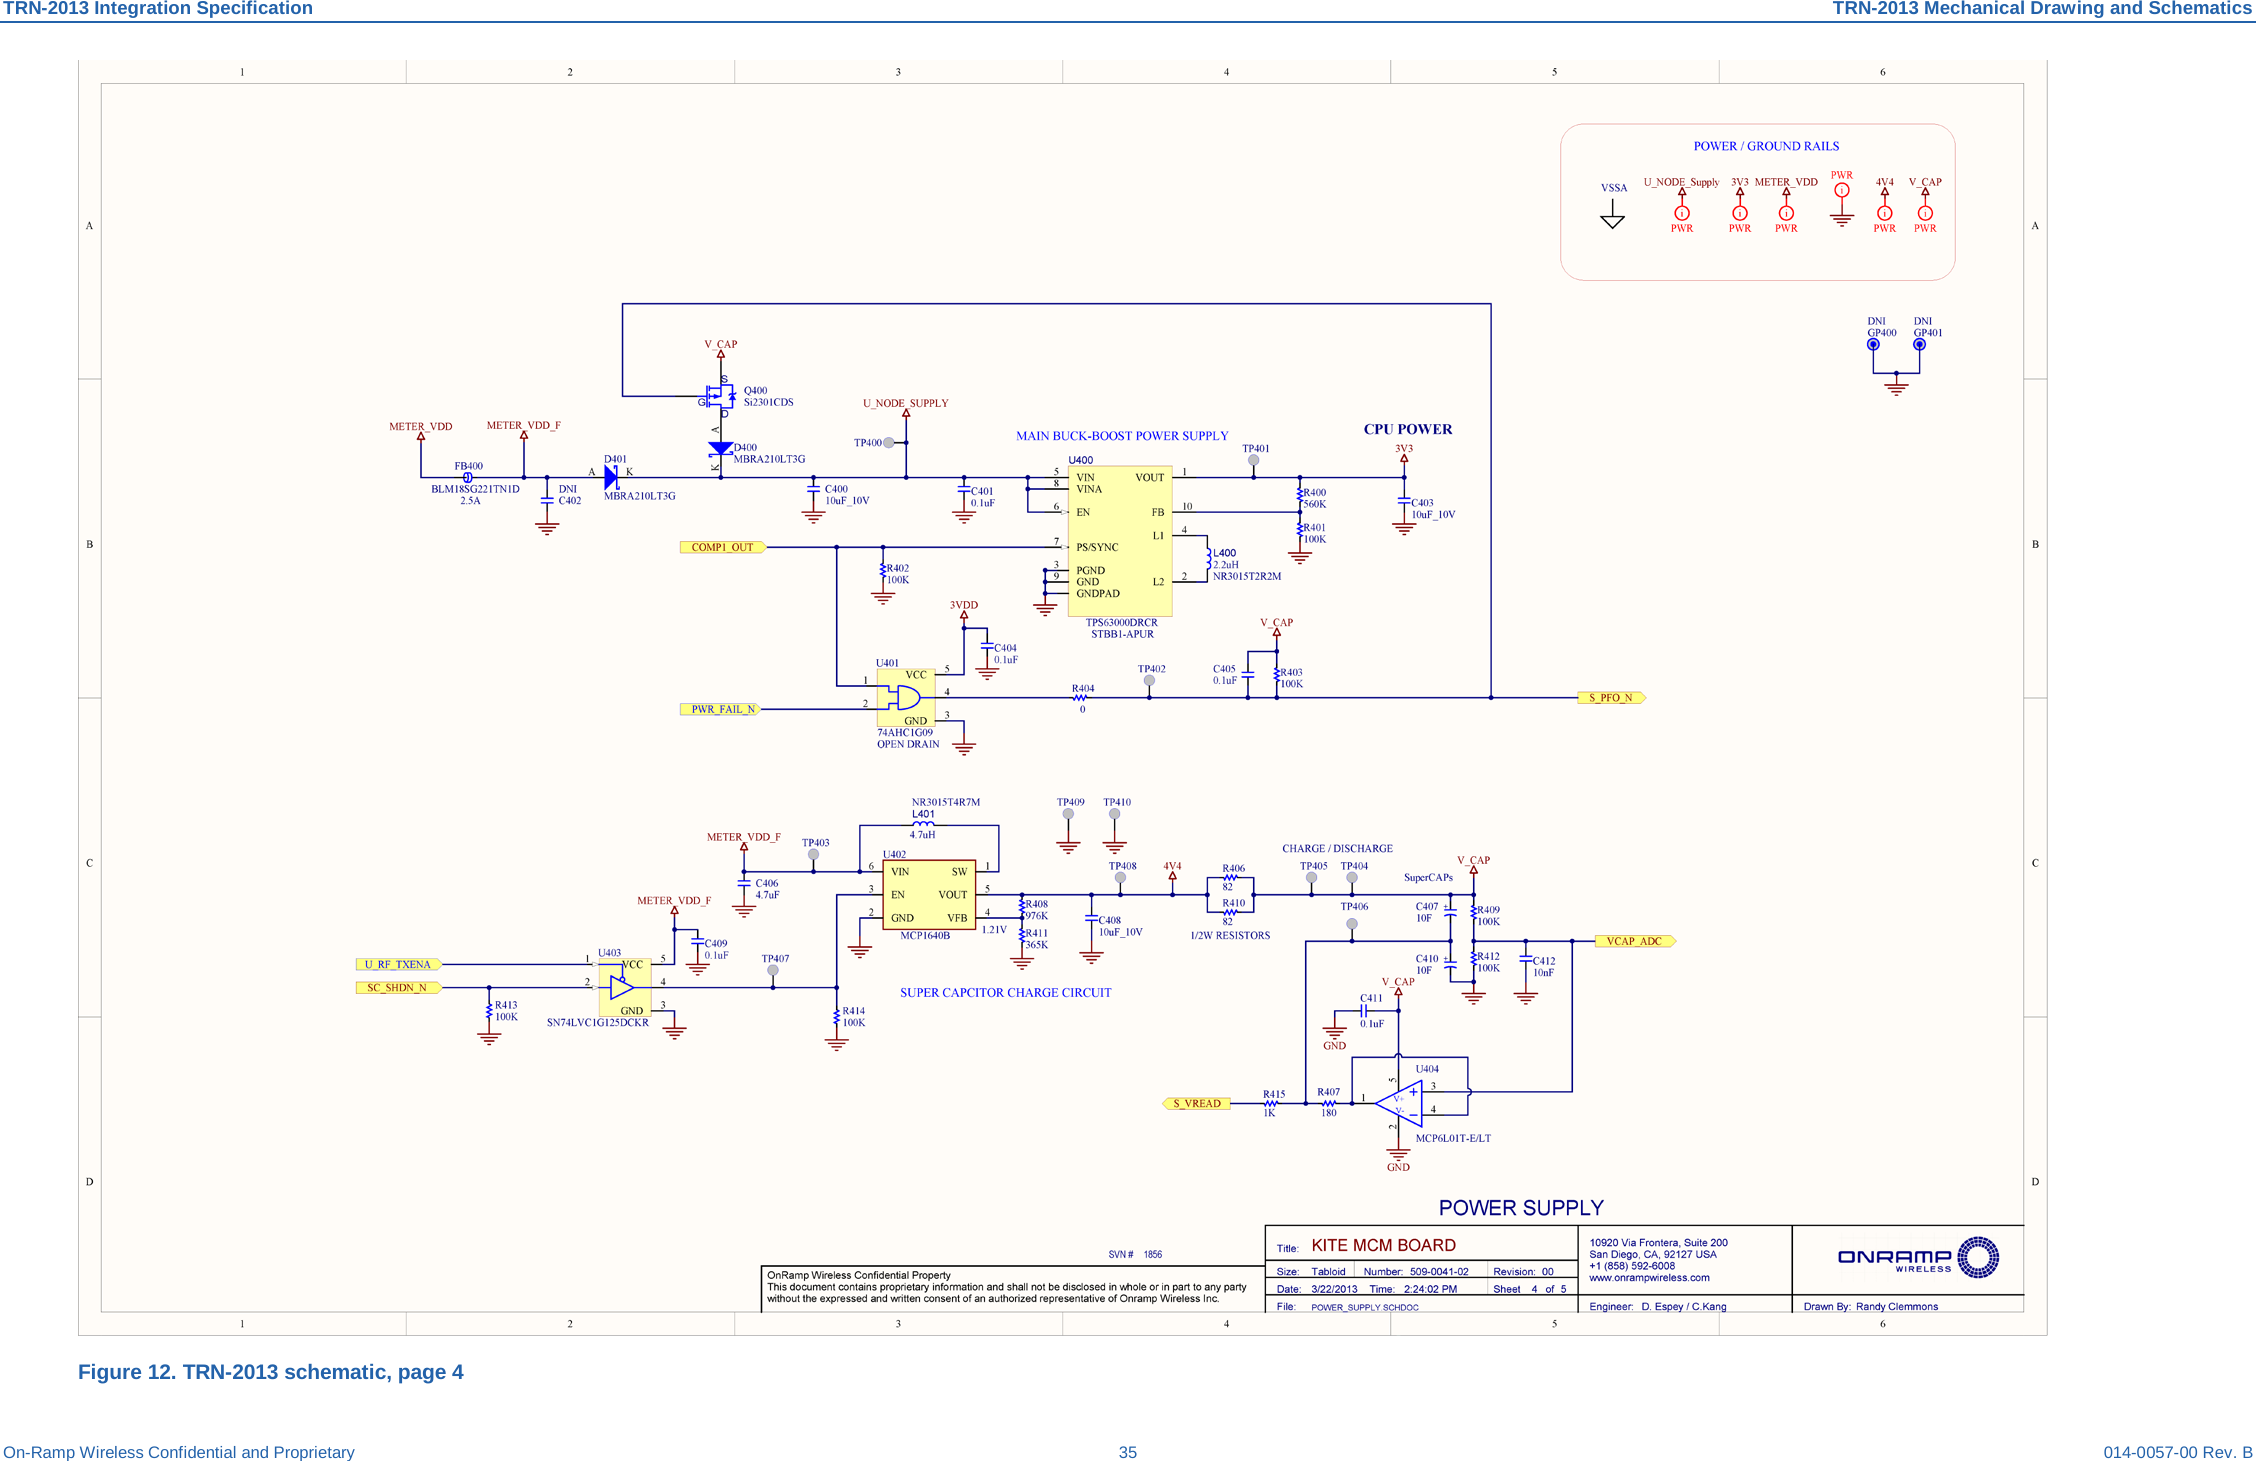 TRN-2013 Integration Specification TRN-2013 Mechanical Drawing and Schematics On-Ramp Wireless Confidential and Proprietary 35 014-0057-00 Rev. B  Figure 12. TRN-2013 schematic, page 4 